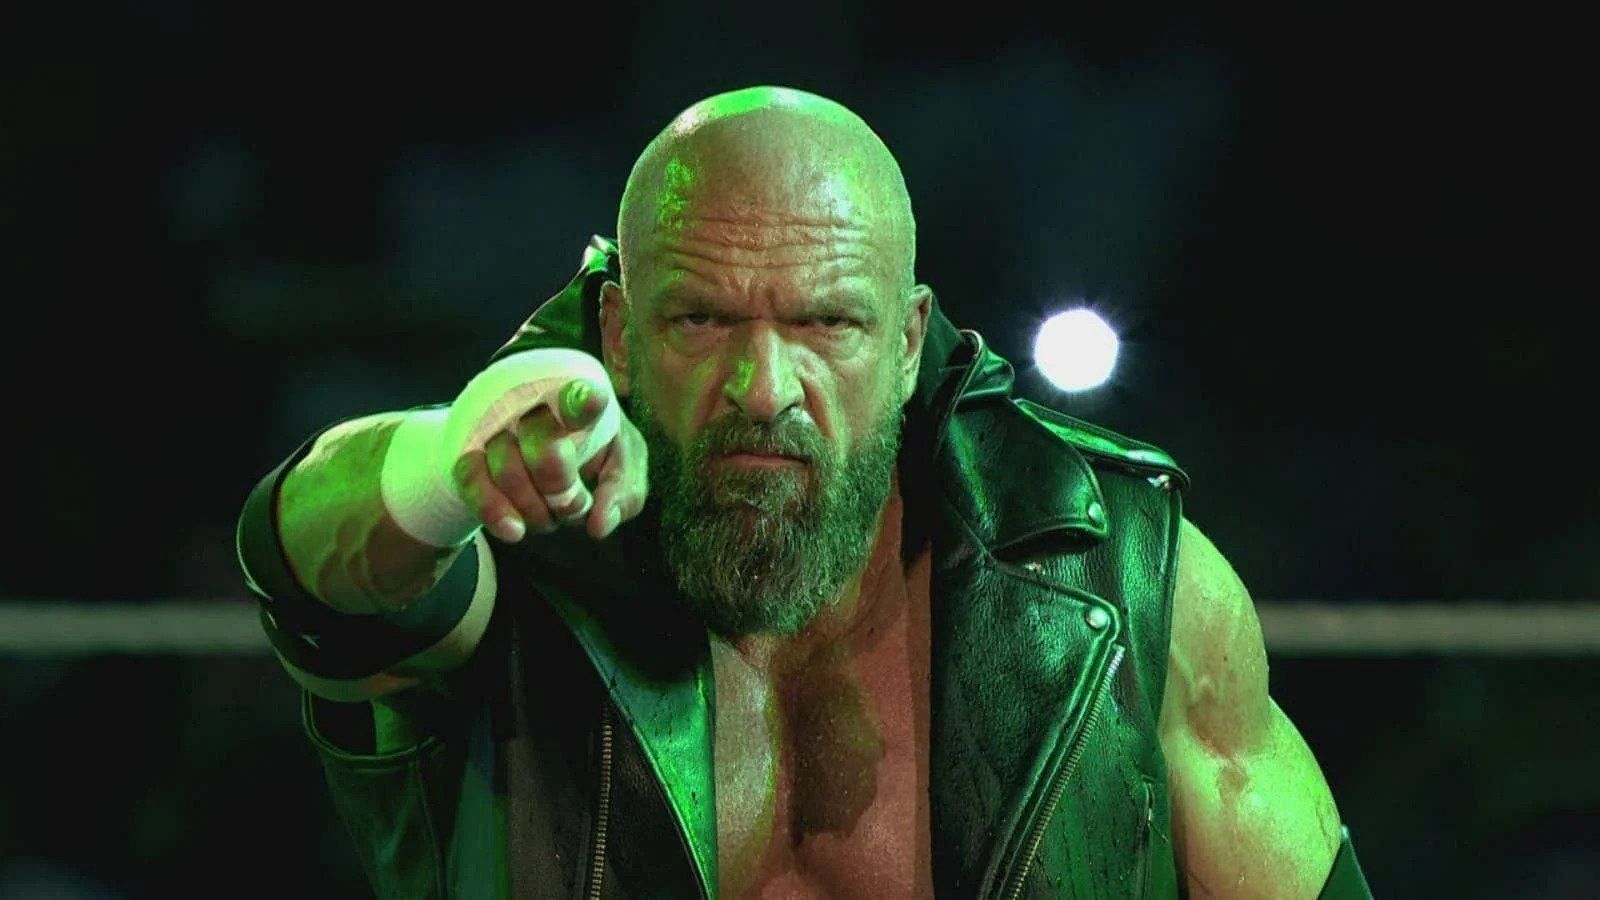 Triple H is in charge of booking WWE